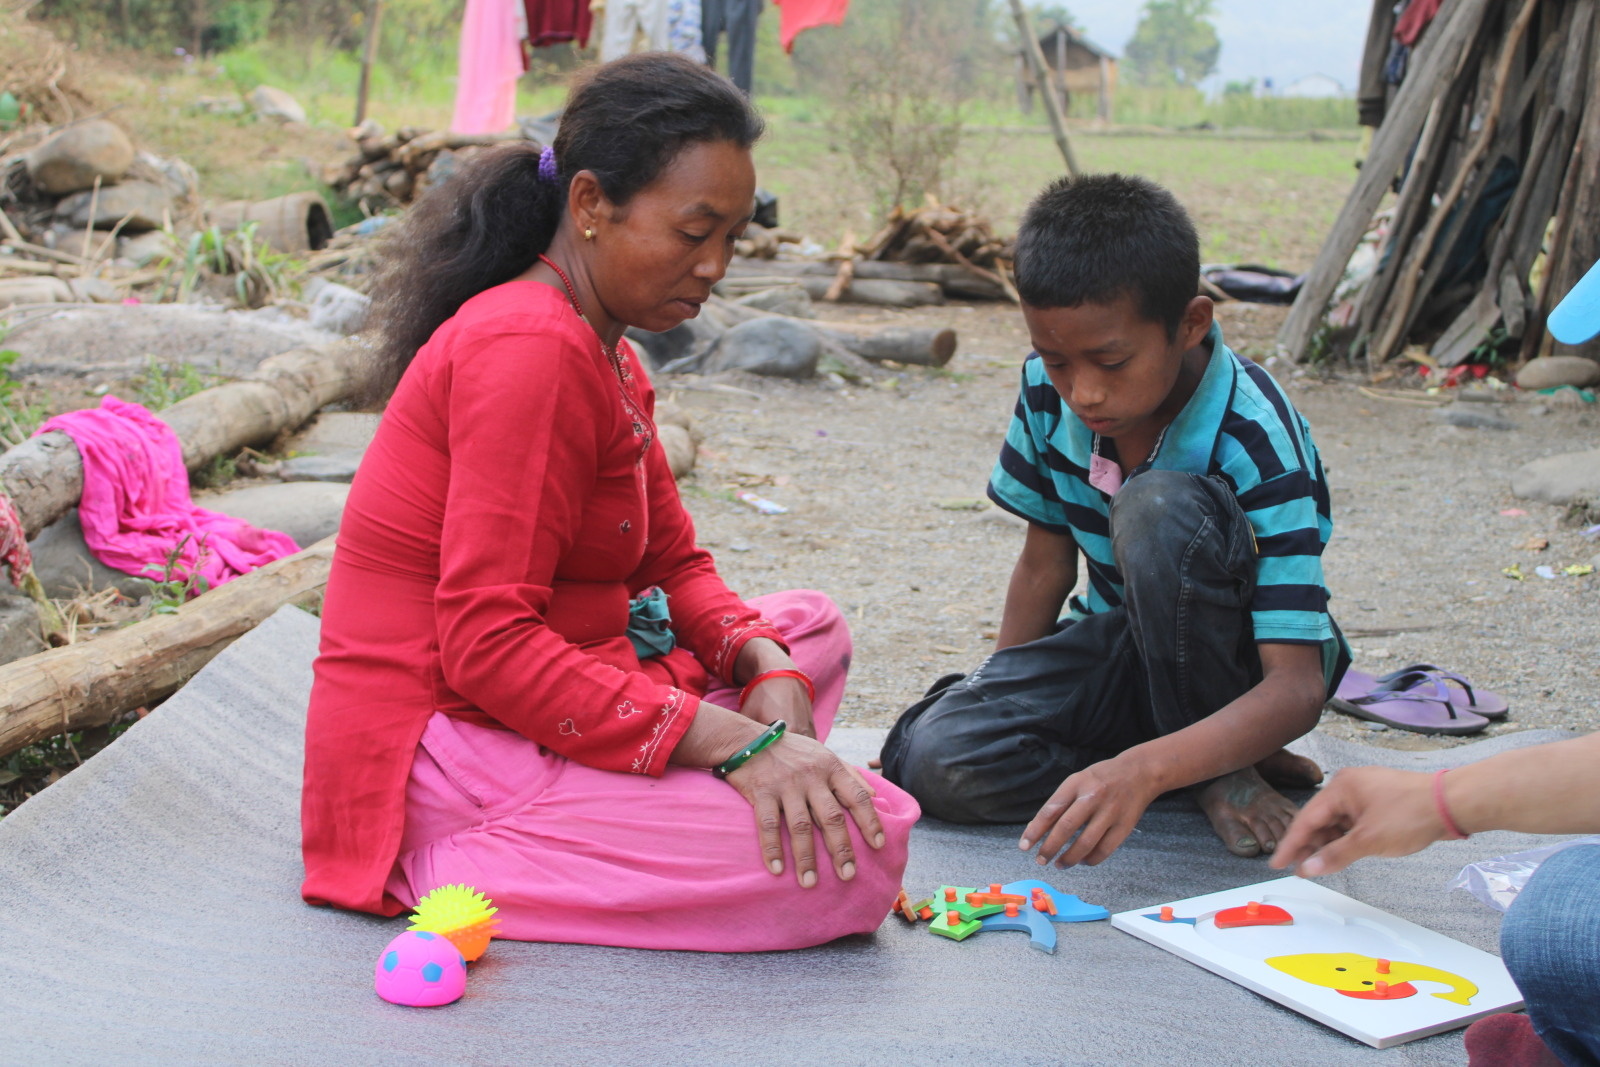 A woman and young boy sit on a mat outside, playing with educational toys